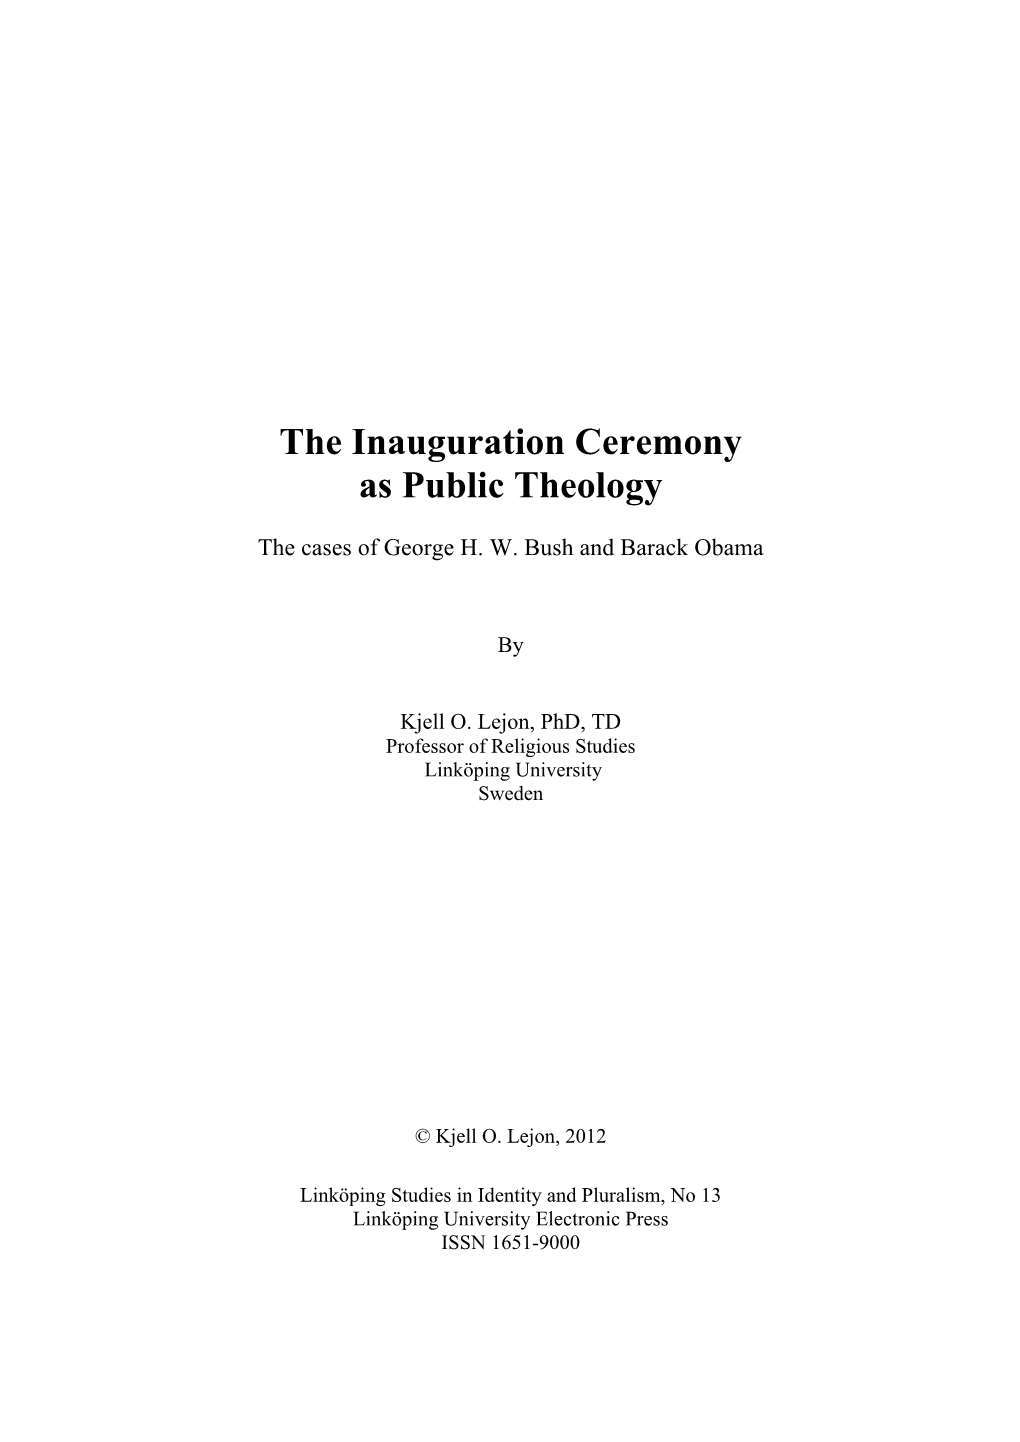 The Inauguration Ceremony As Public Theology